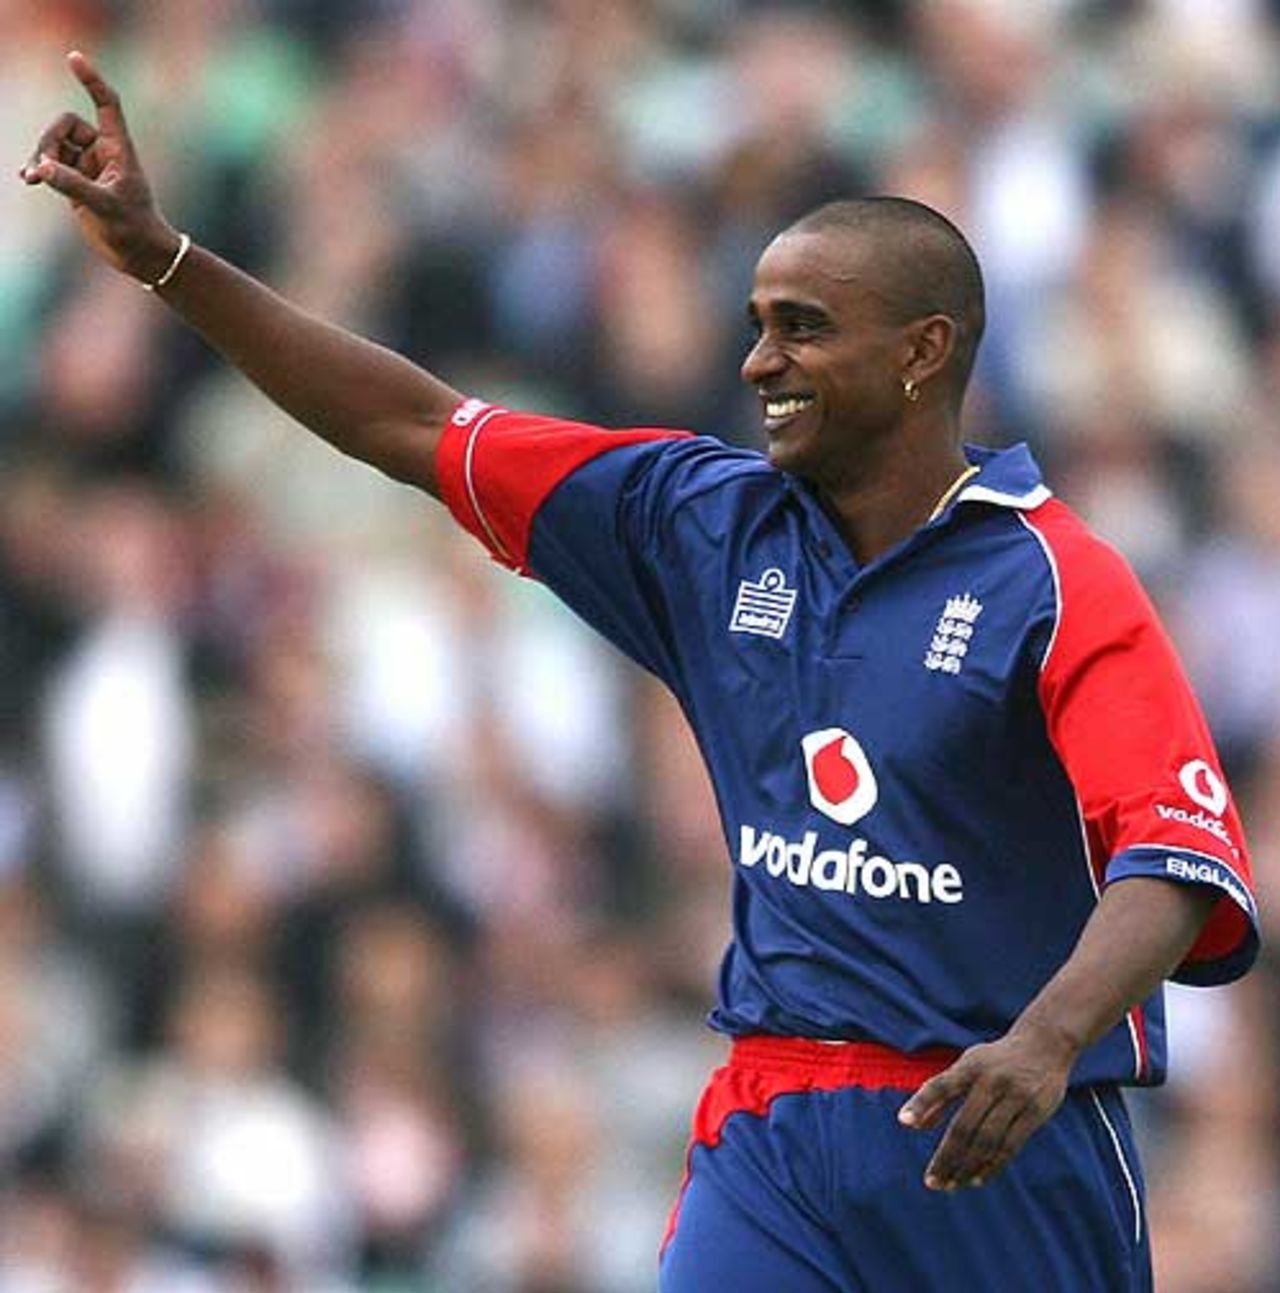 Dimitri Mascarenhas took two wickets (and two catches) on his international debut, England v West Indies, Twenty20, The Oval, June 28, 2007